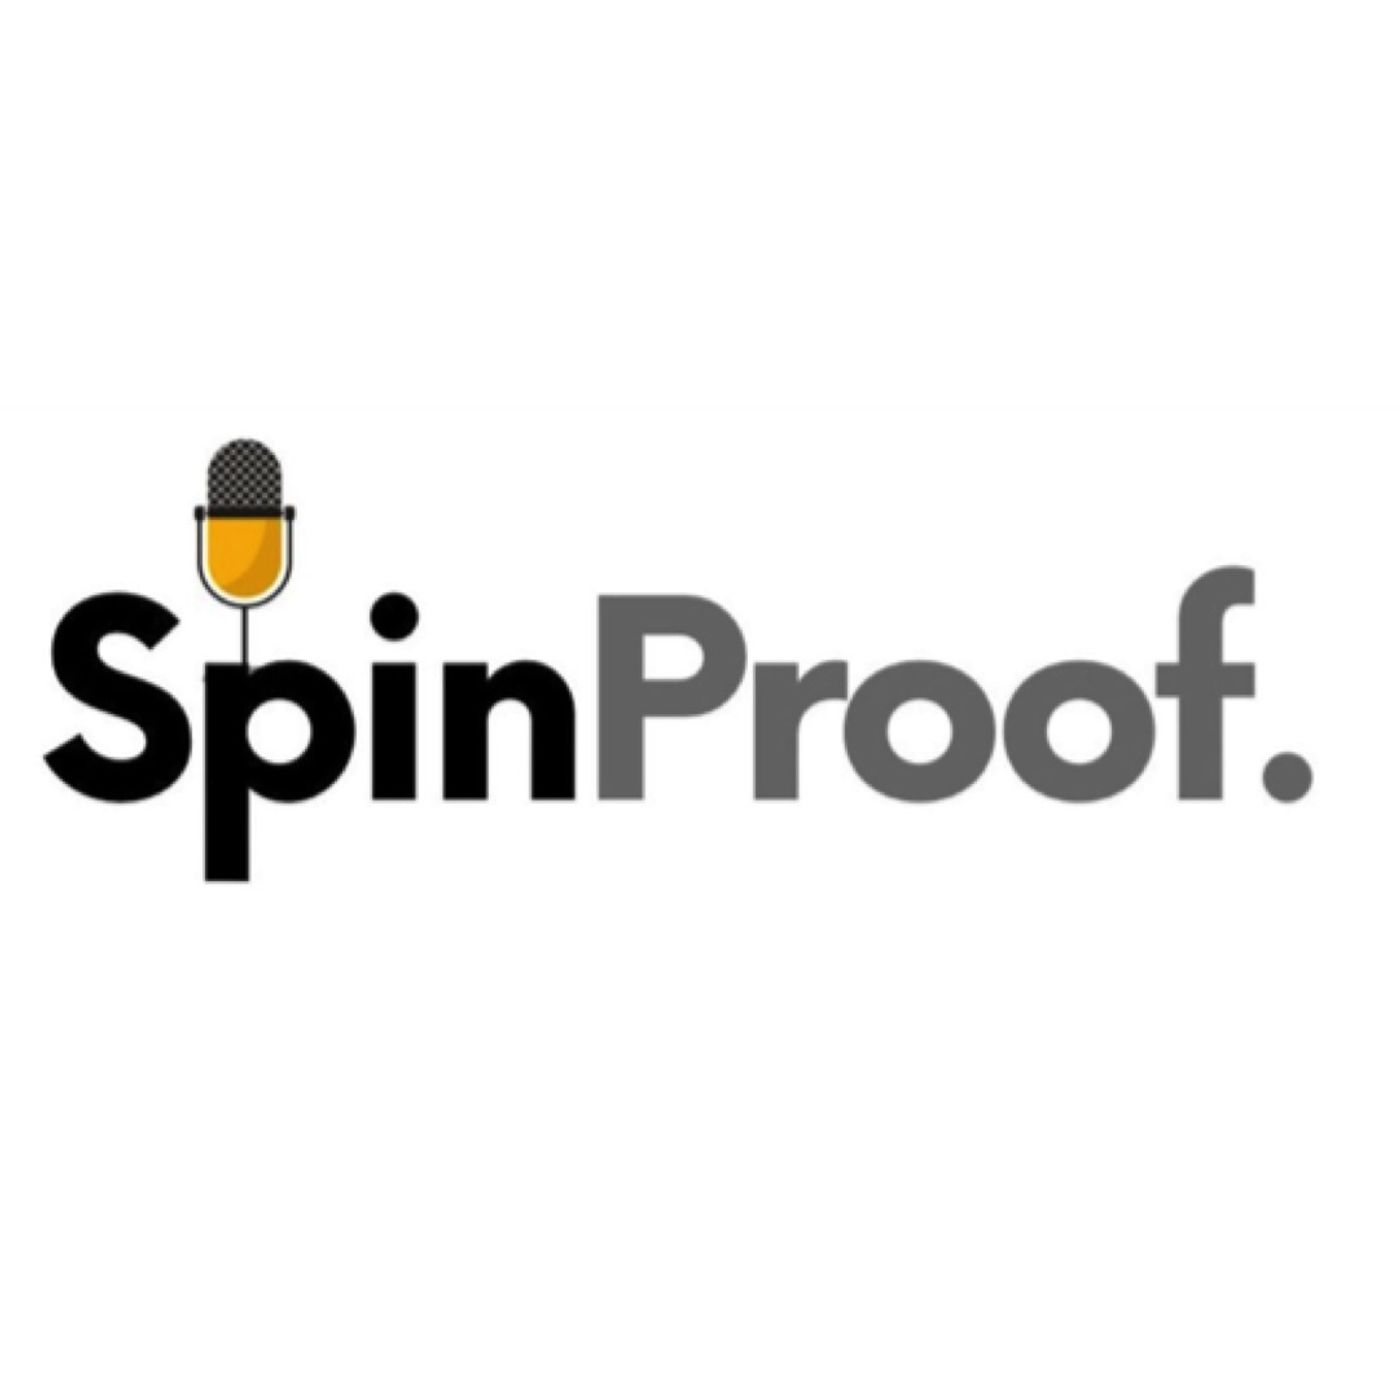 Leo Puglisi join SpinProof